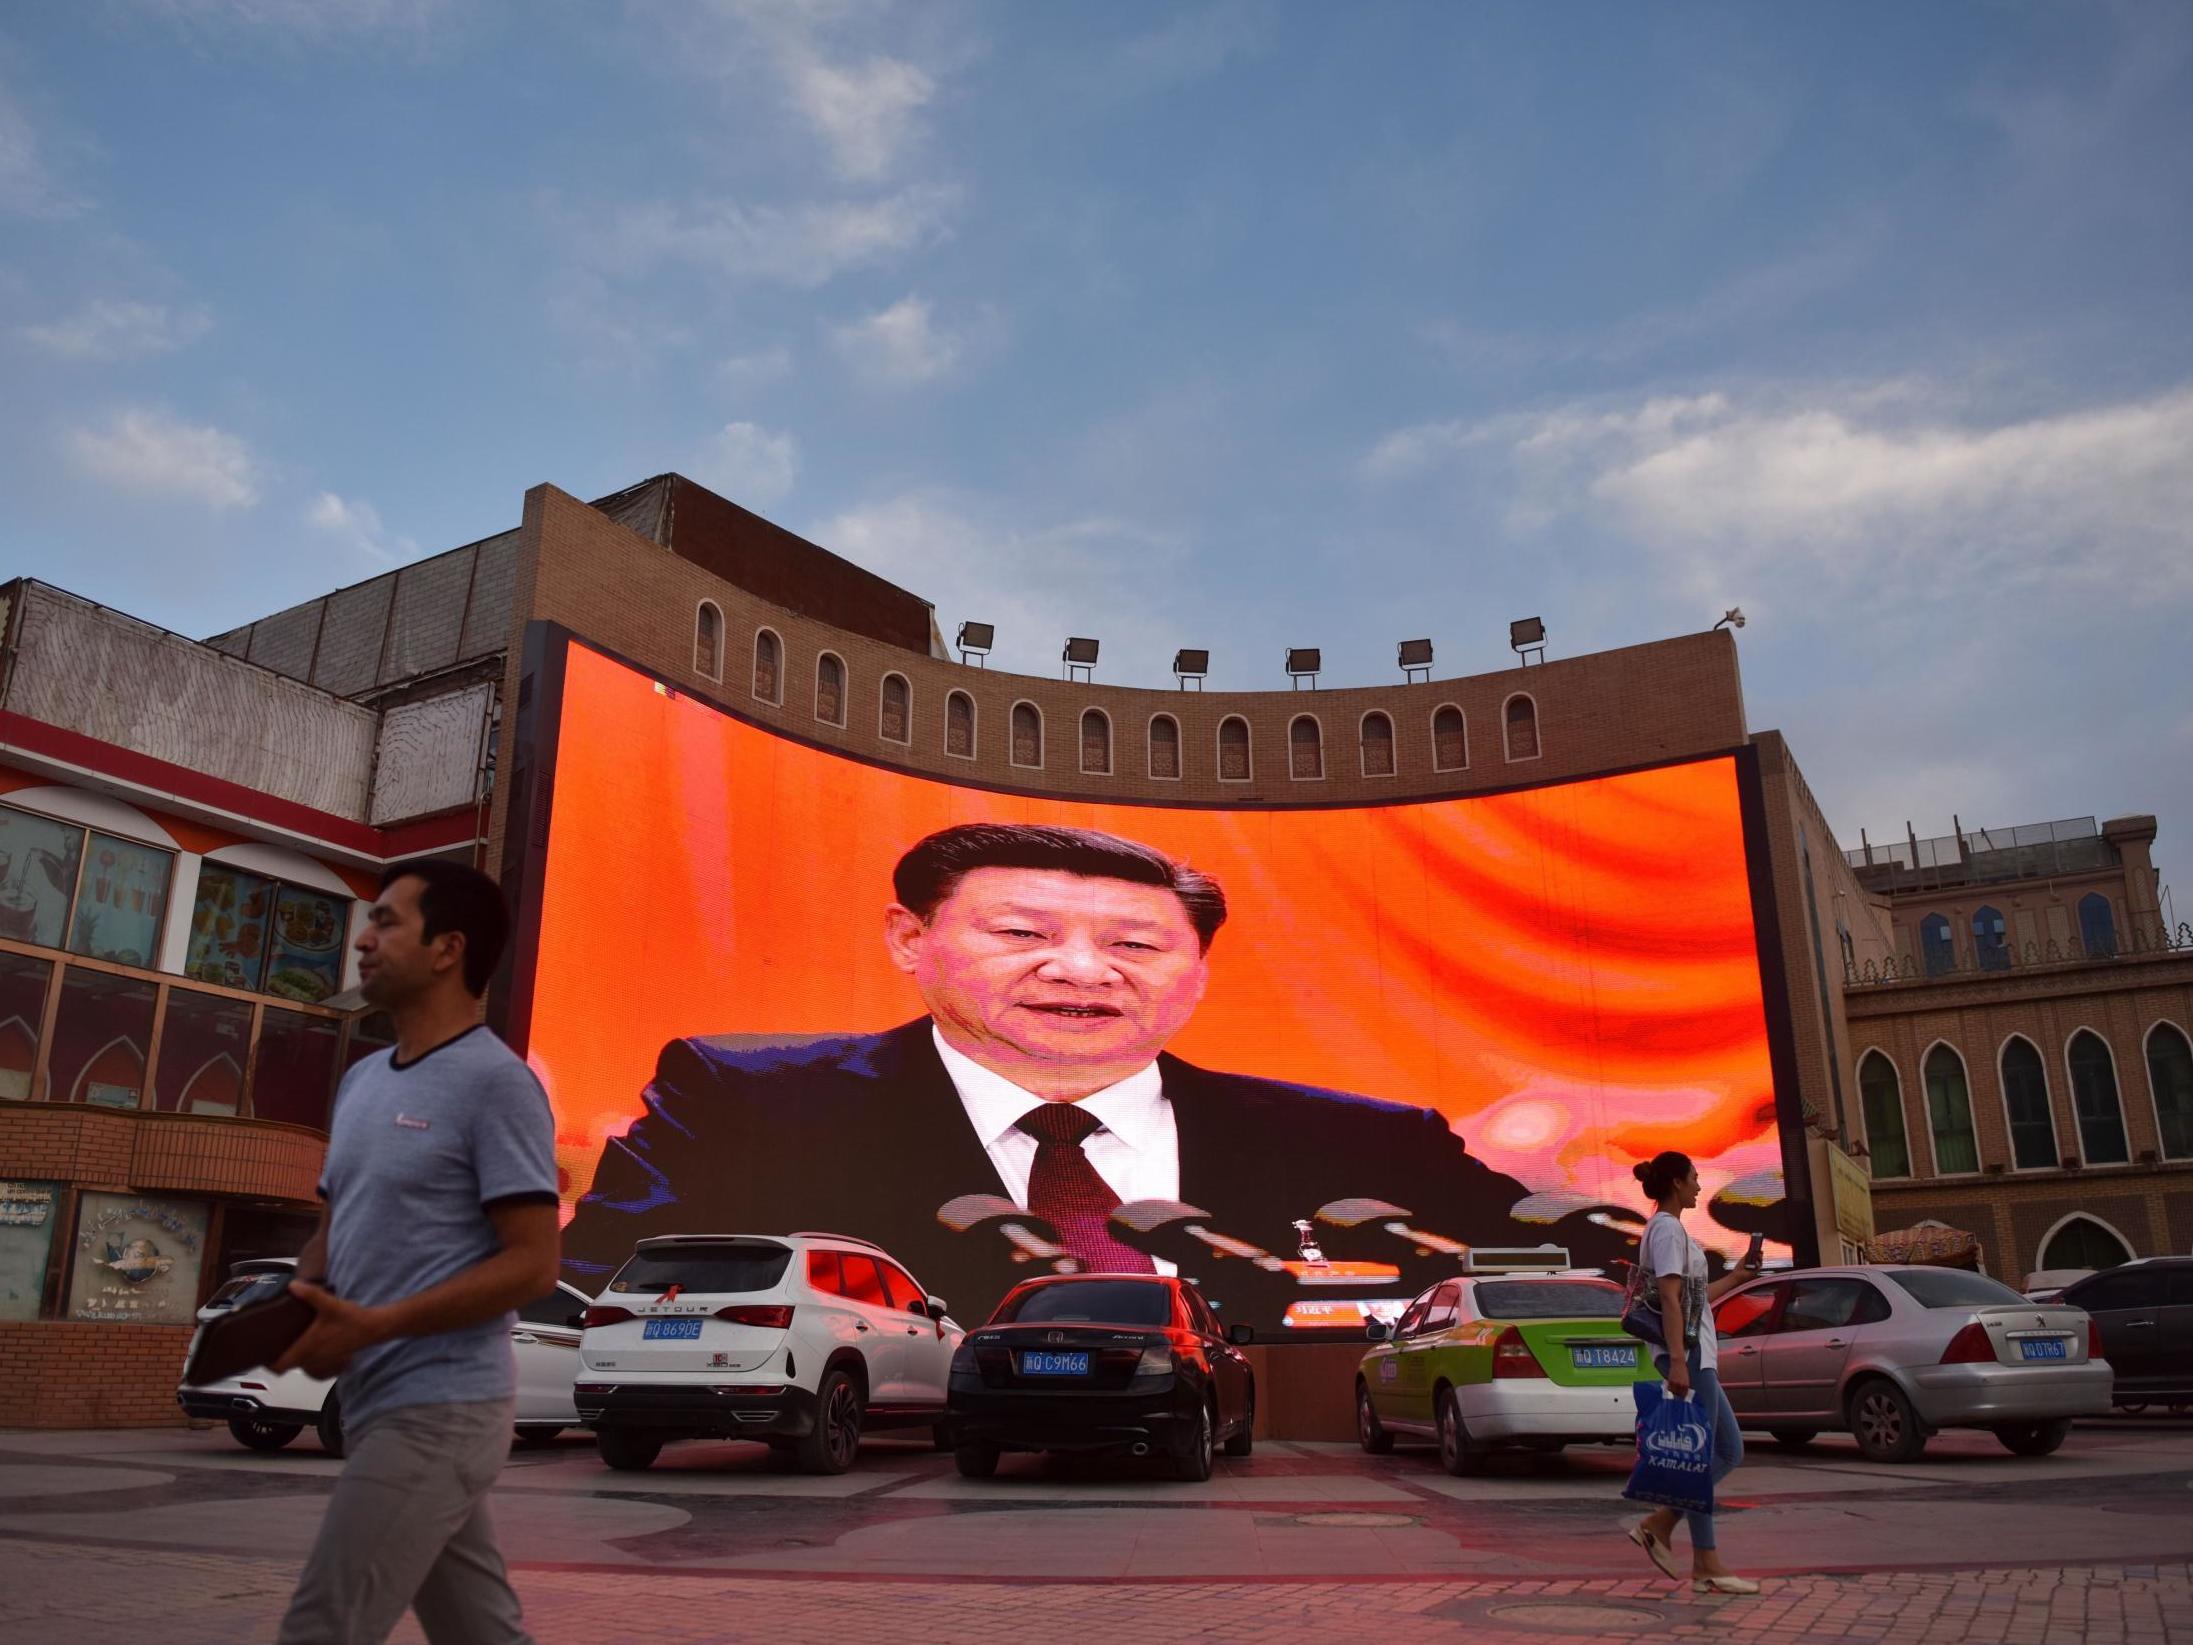 Xi Jinping is pursuing an ethnic crackdown in China in the belief it will strengthen his rule